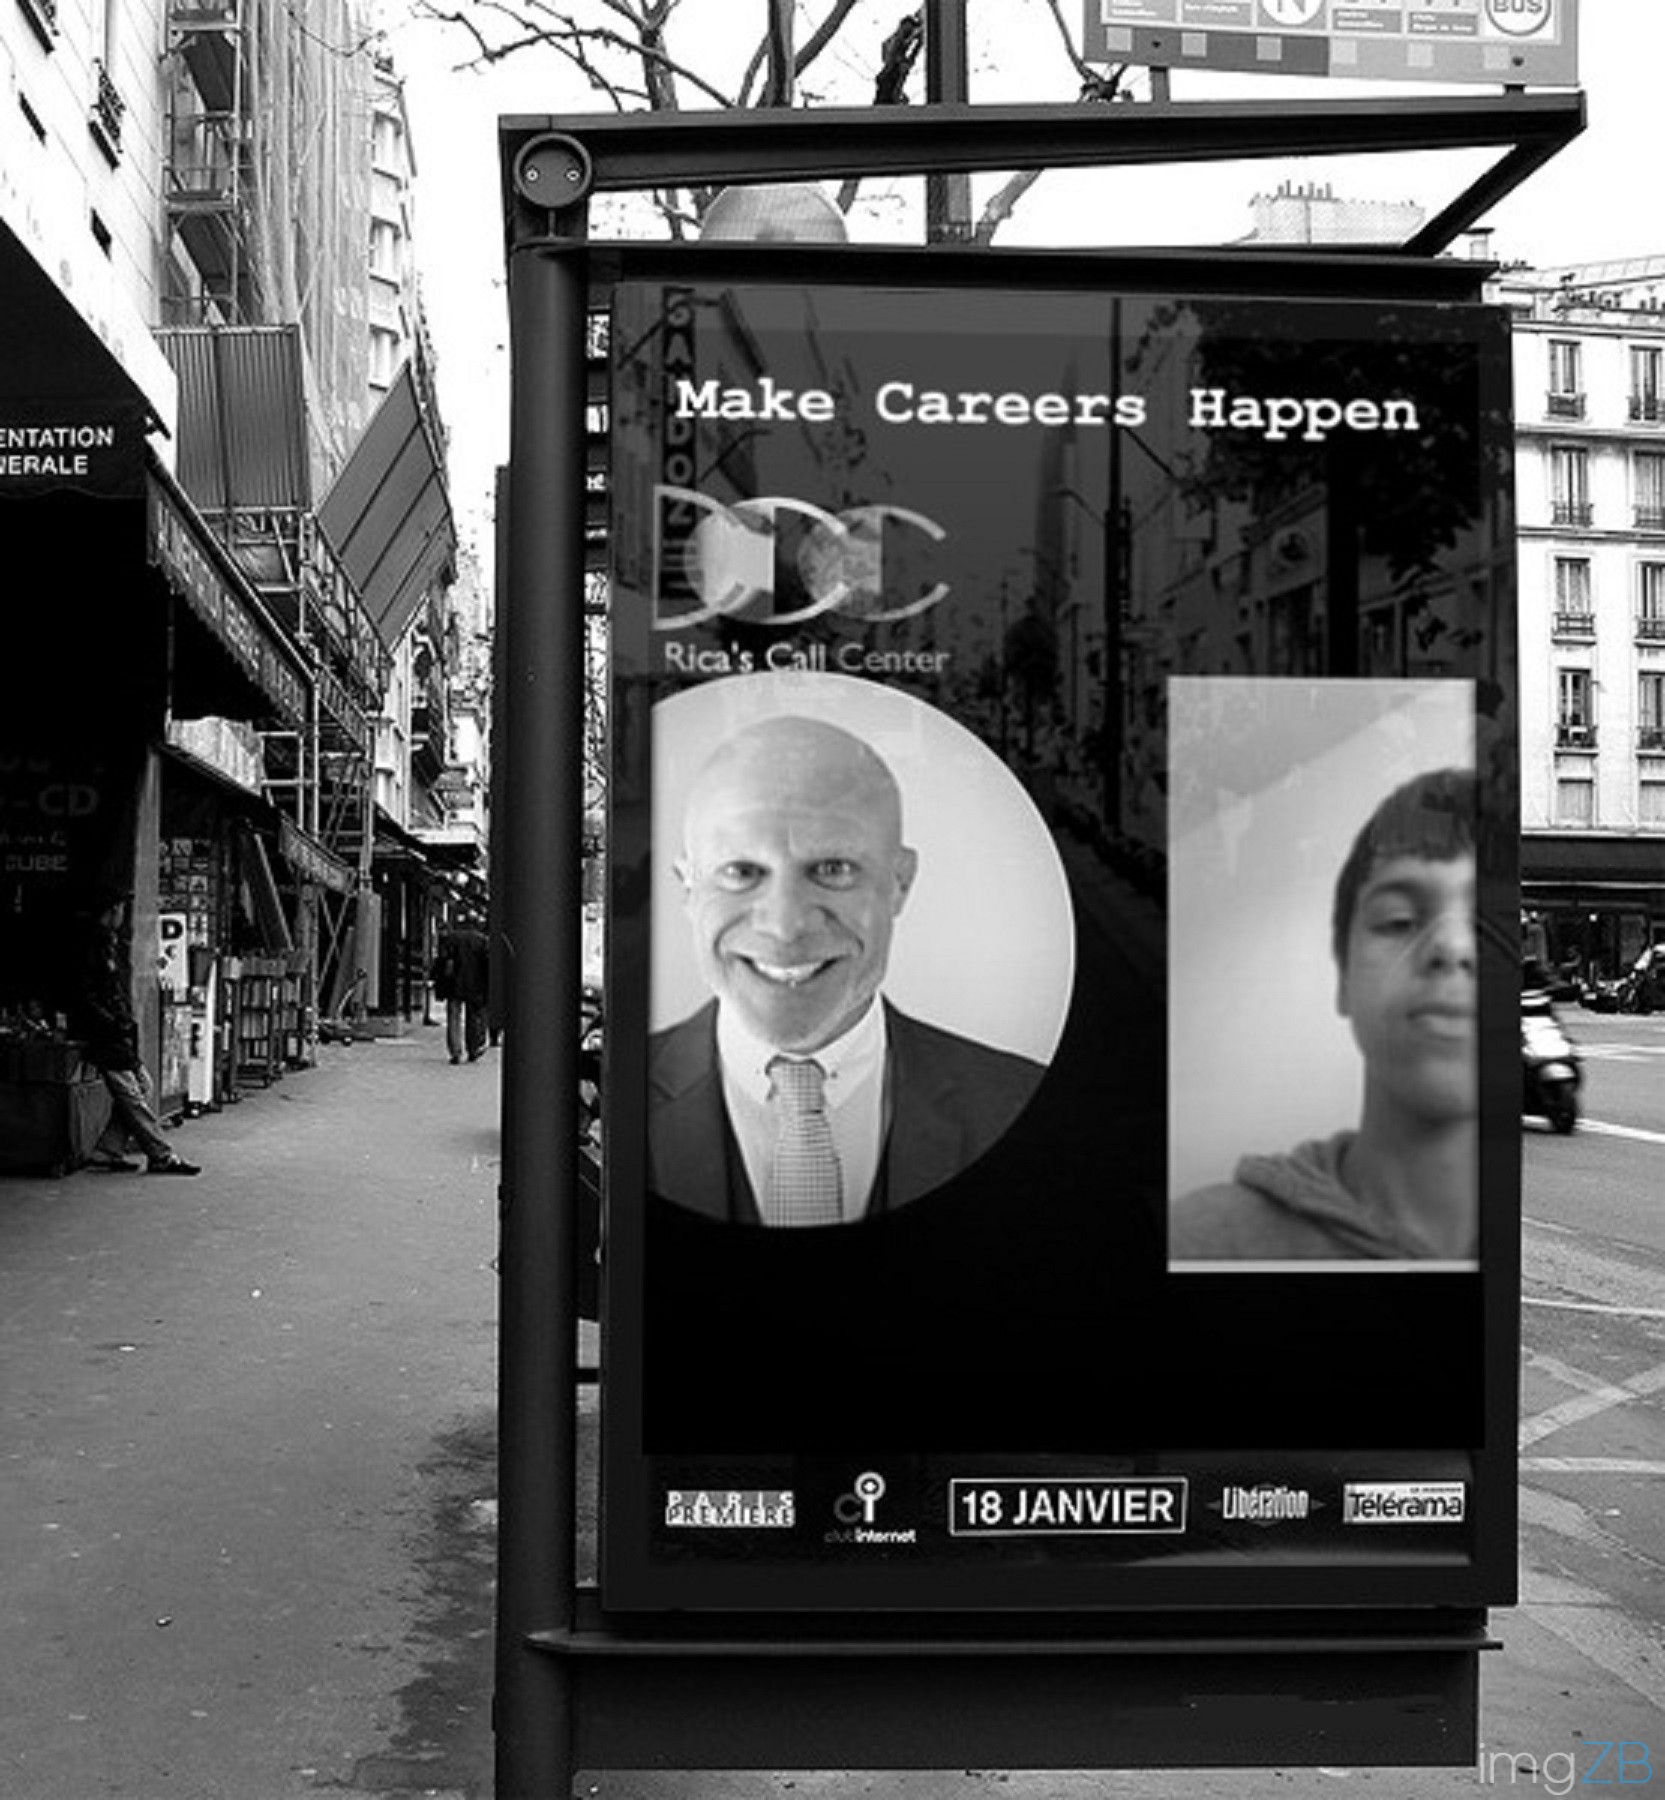 MAKE+CAREERS+HAPPEN+PODCAST+GUEST+RICHARD+BLANK+COSTA+RICA%27S+CALL+CENTER.